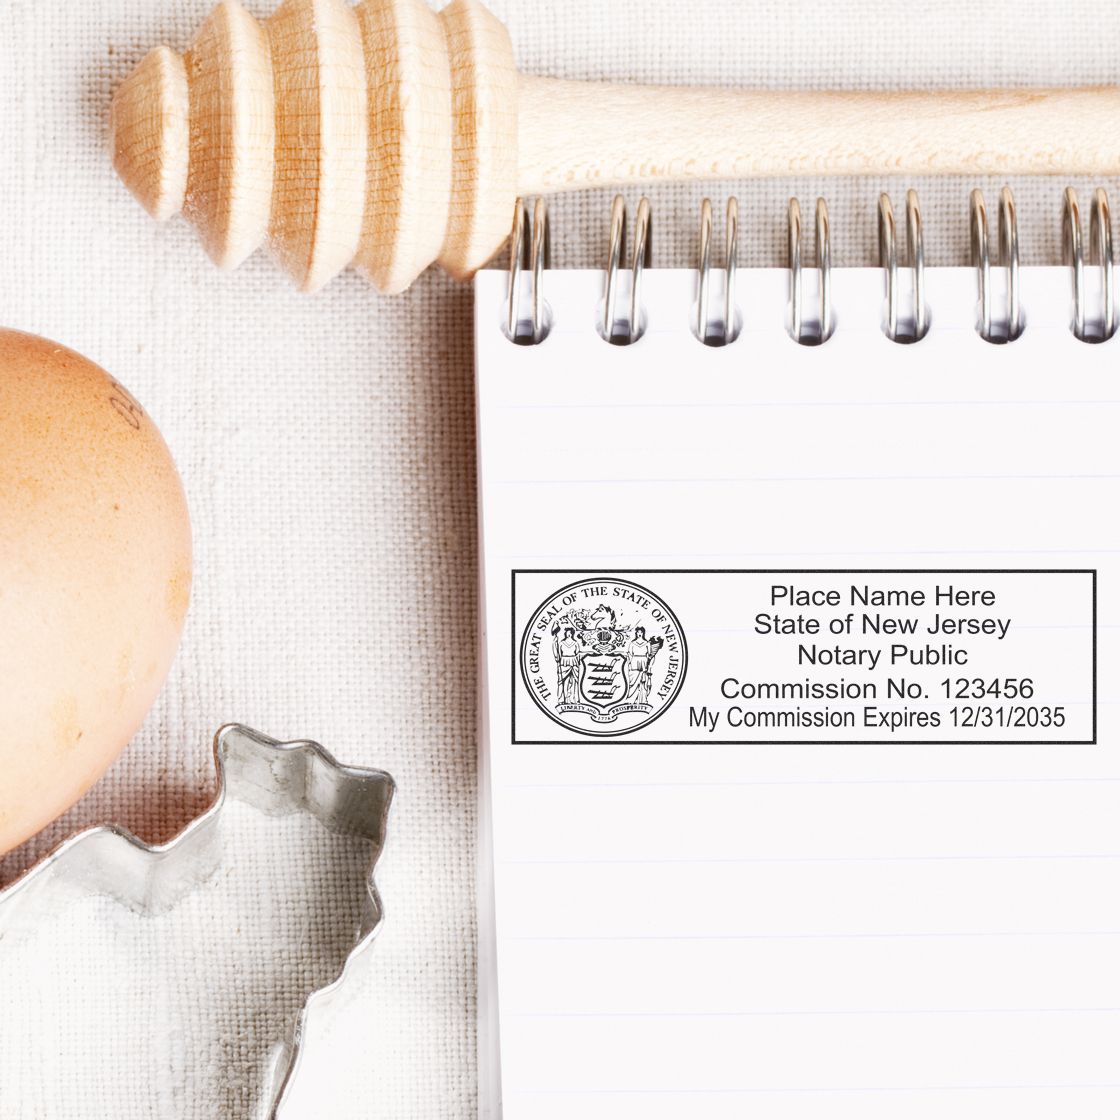 A lifestyle photo showing a stamped image of the MaxLight Premium Pre-Inked New Jersey State Seal Notarial Stamp on a piece of paper